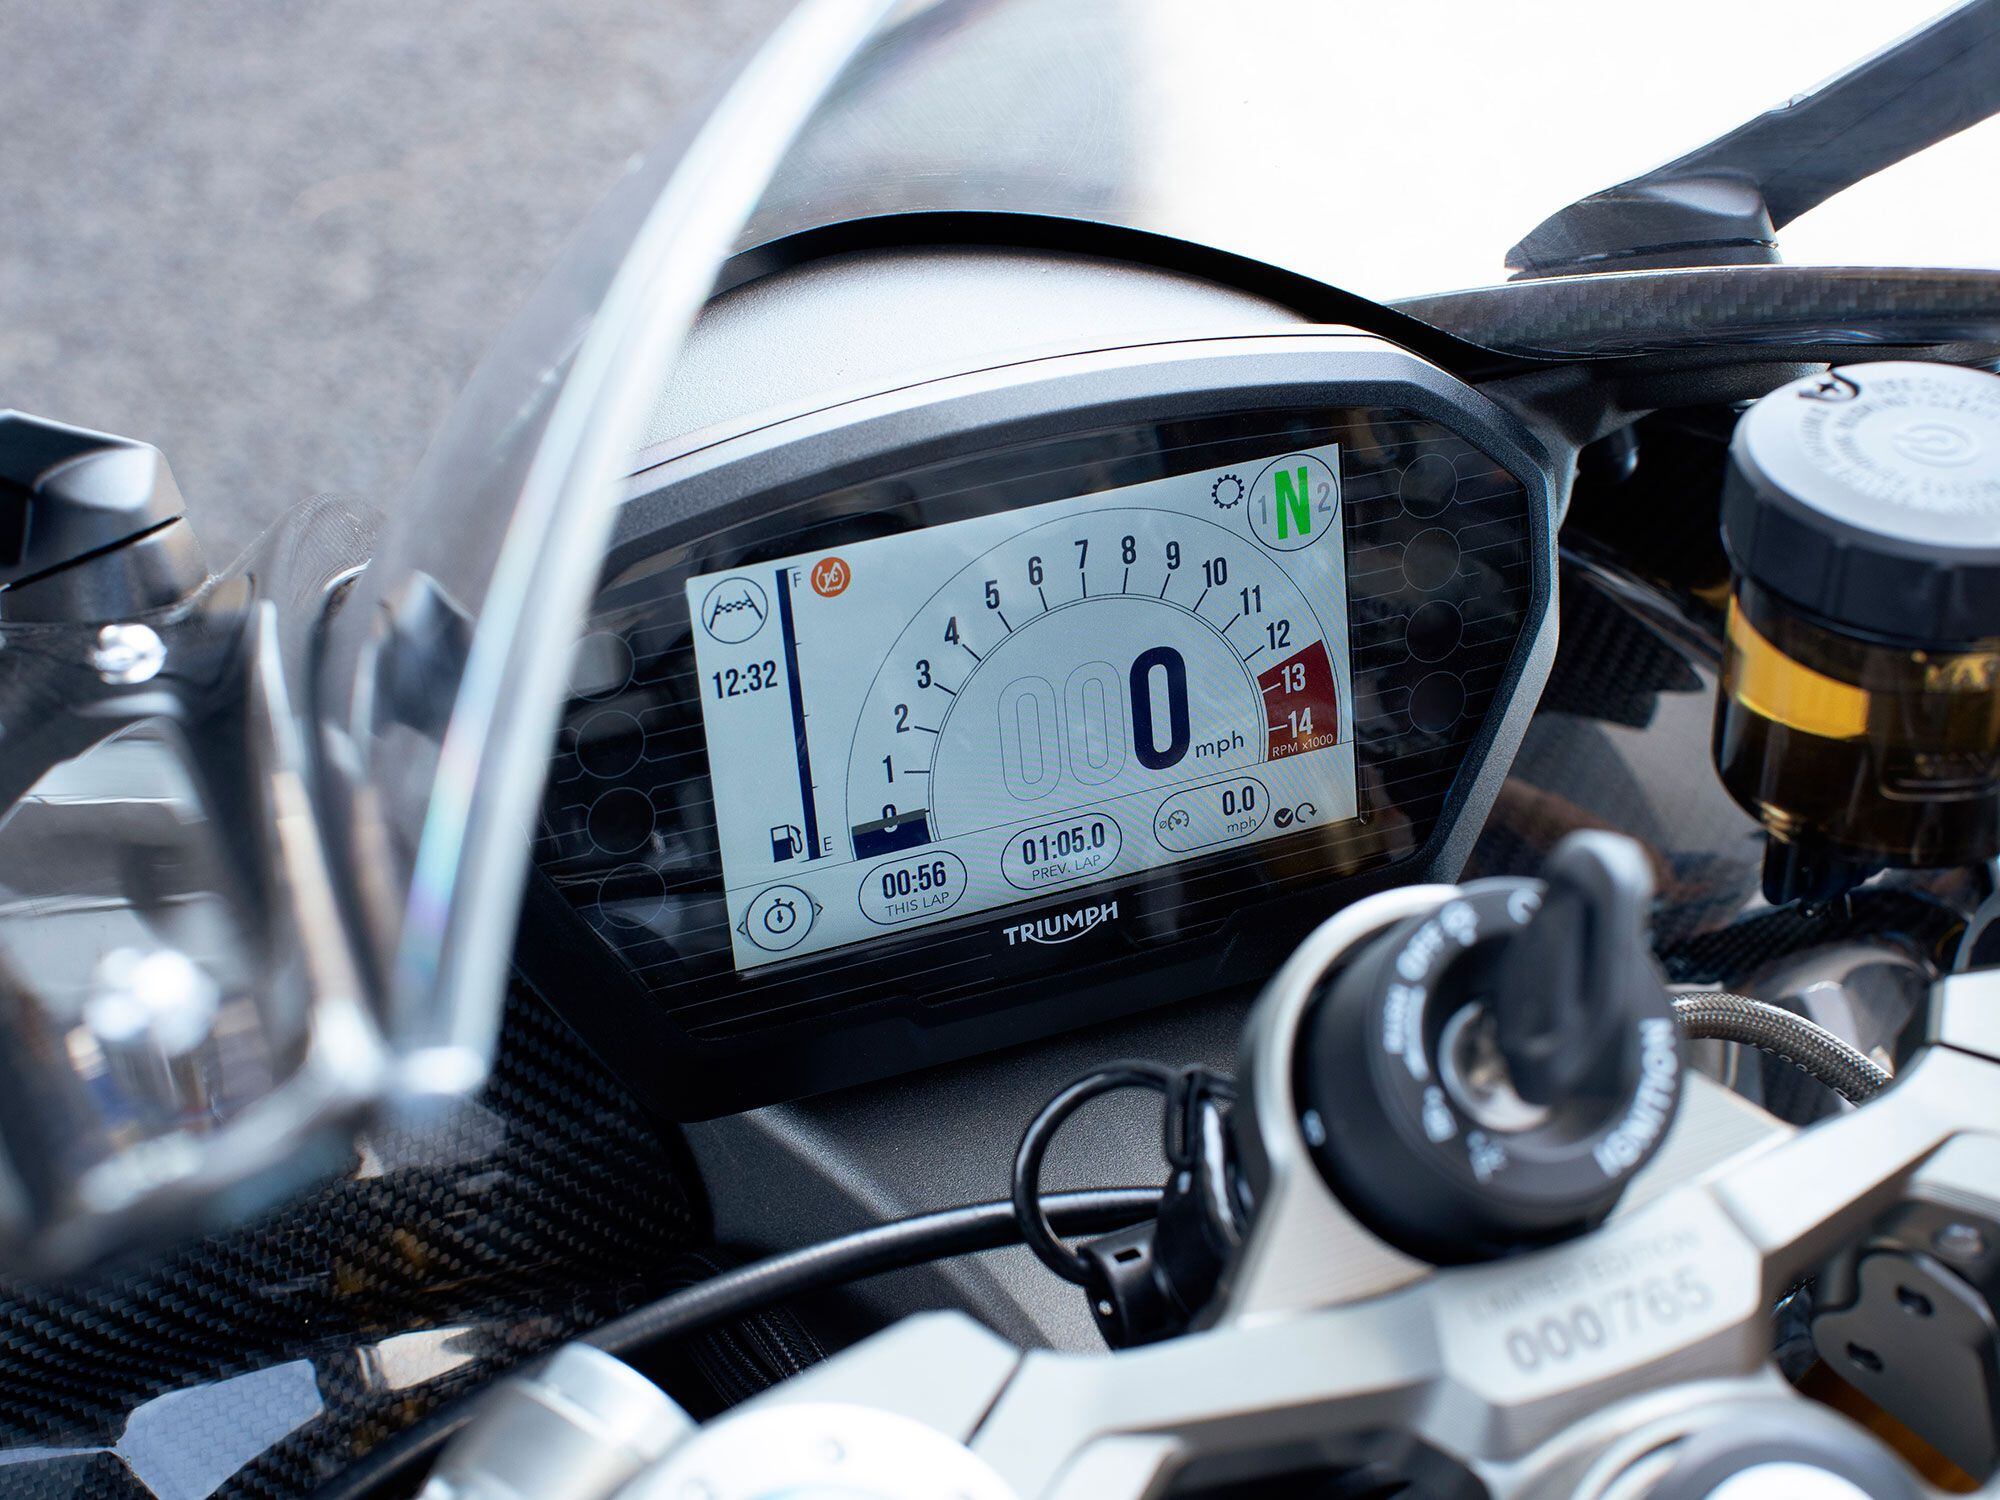 The Daytona Moto2 765 Limited Edition is graced with a color TFT display. Its angled a tad low and it could be brighter during daytime rides.